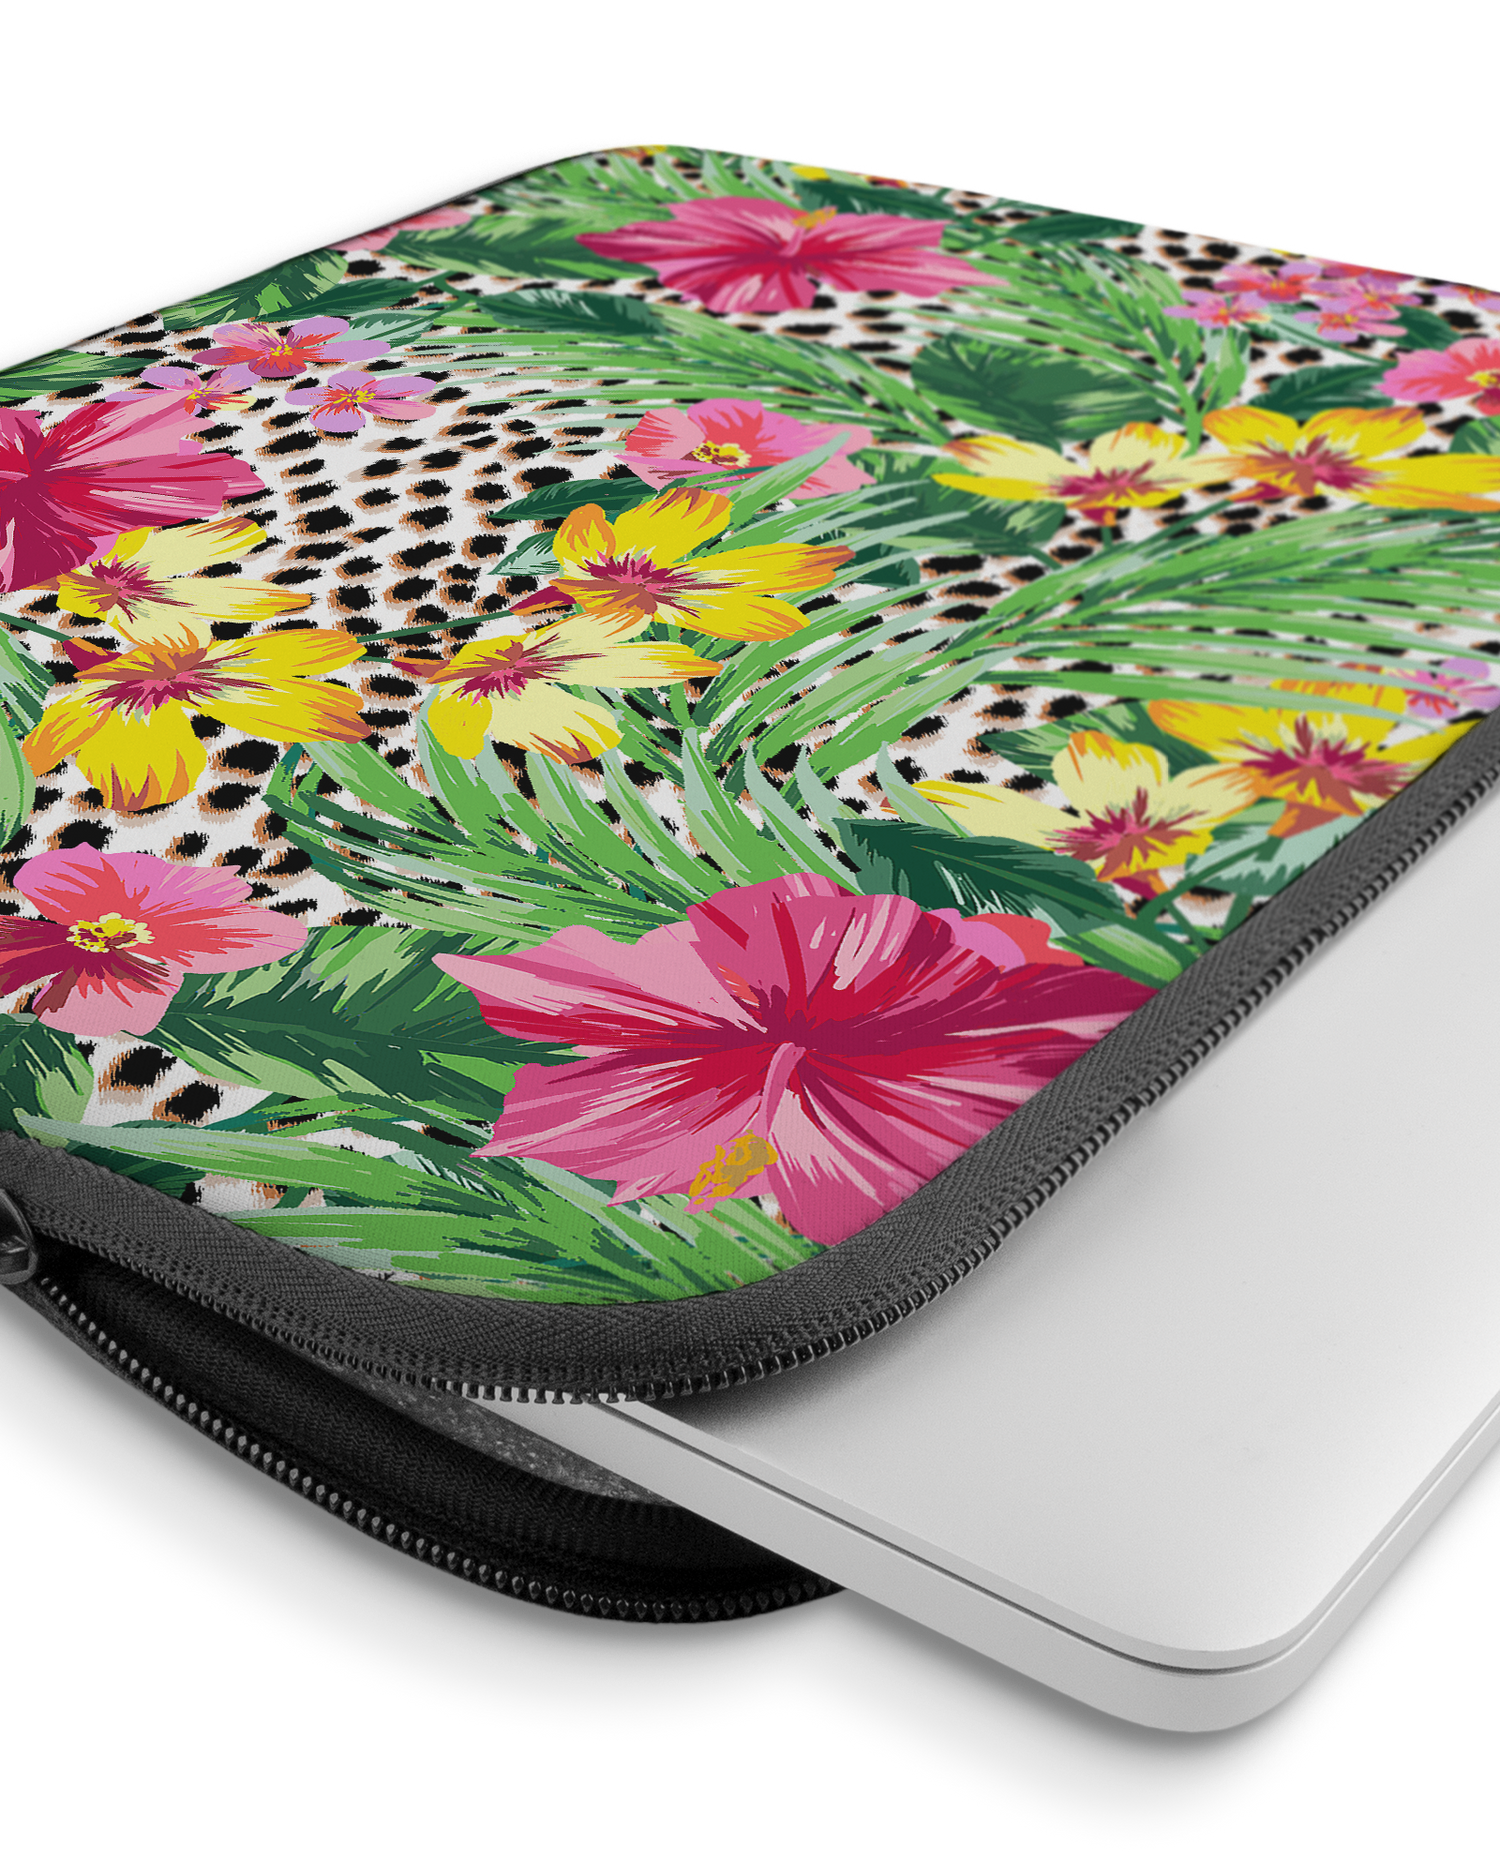 Tropical Cheetah Laptop Case 15 inch with device inside